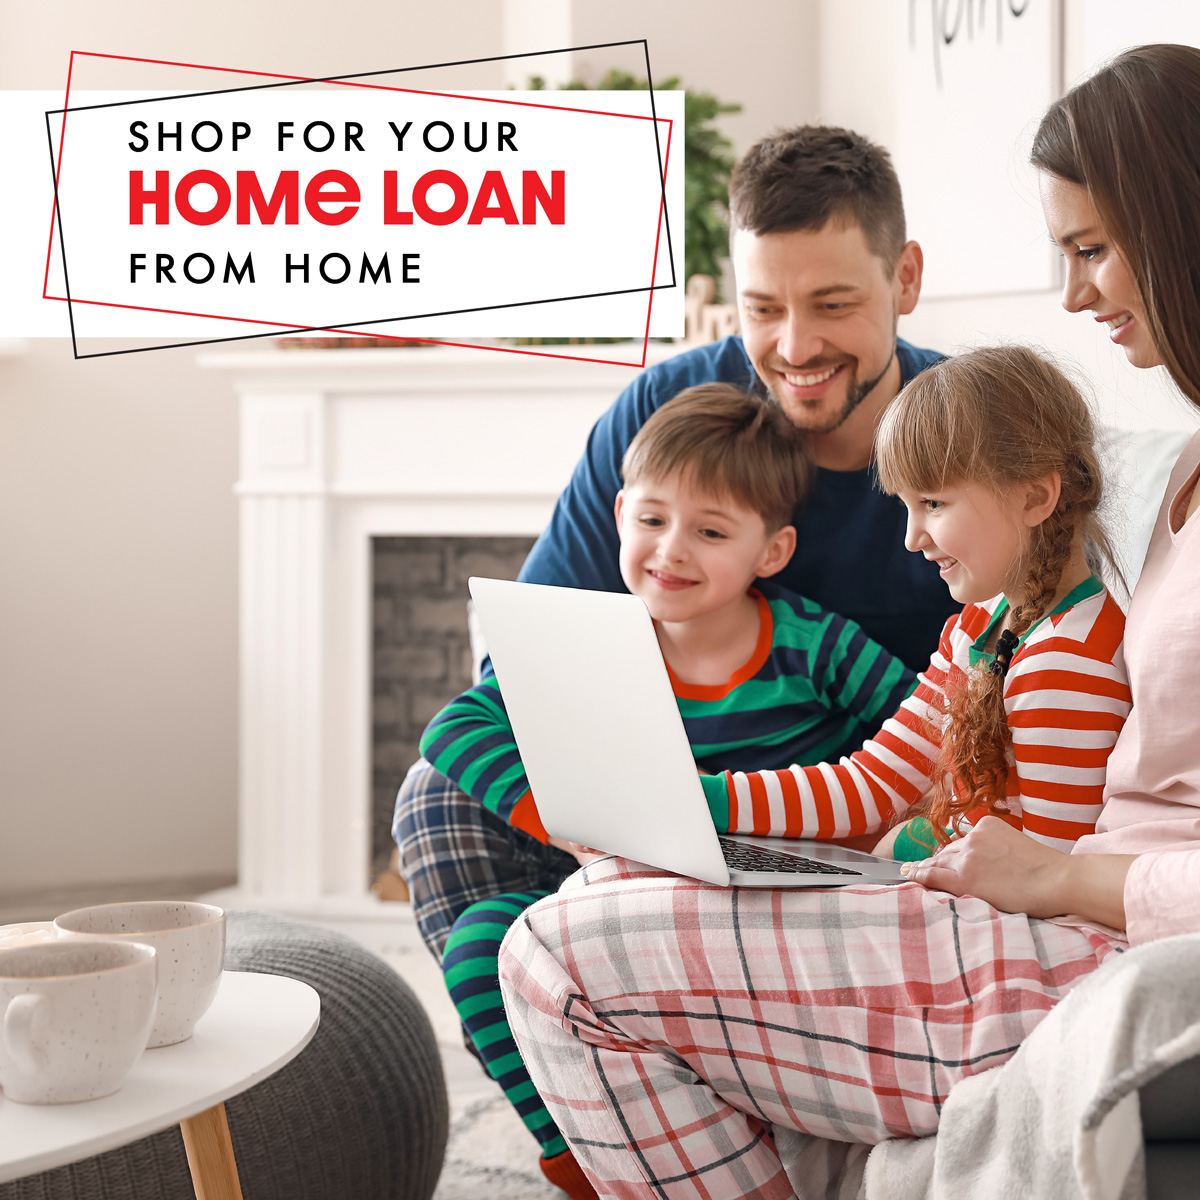 There's nothing better than shopping in your pajamas while curled up on a couch! Did you know you can buy a house with the same ease when you work with an independent mortgage broker? Reach out to me and we can start an online mortgage application today. #homeloan #realestate